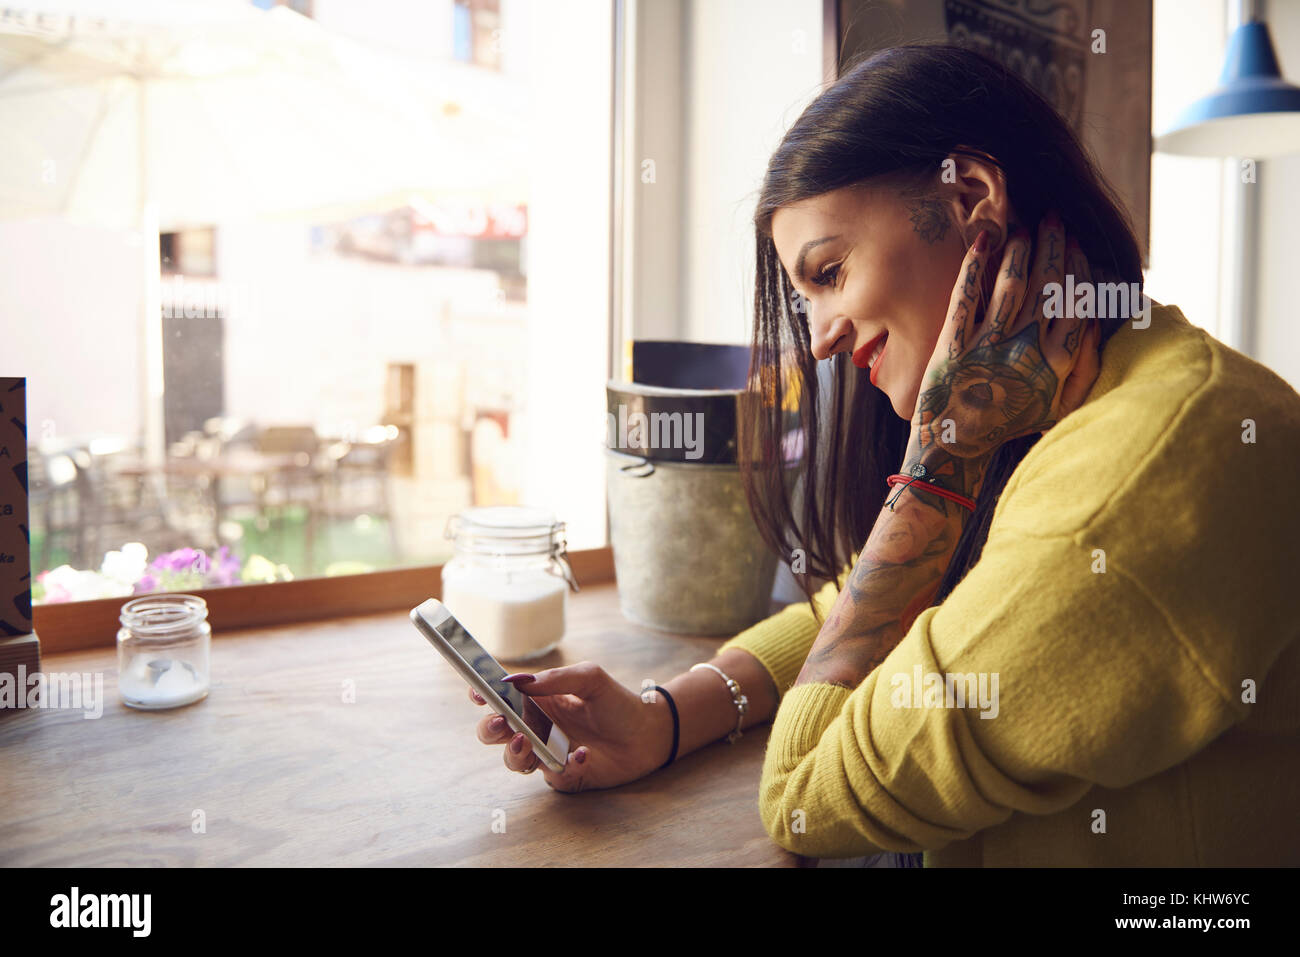 Young woman sitting in cafe, using smartphone, tattoos on arm and hand Stock Photo